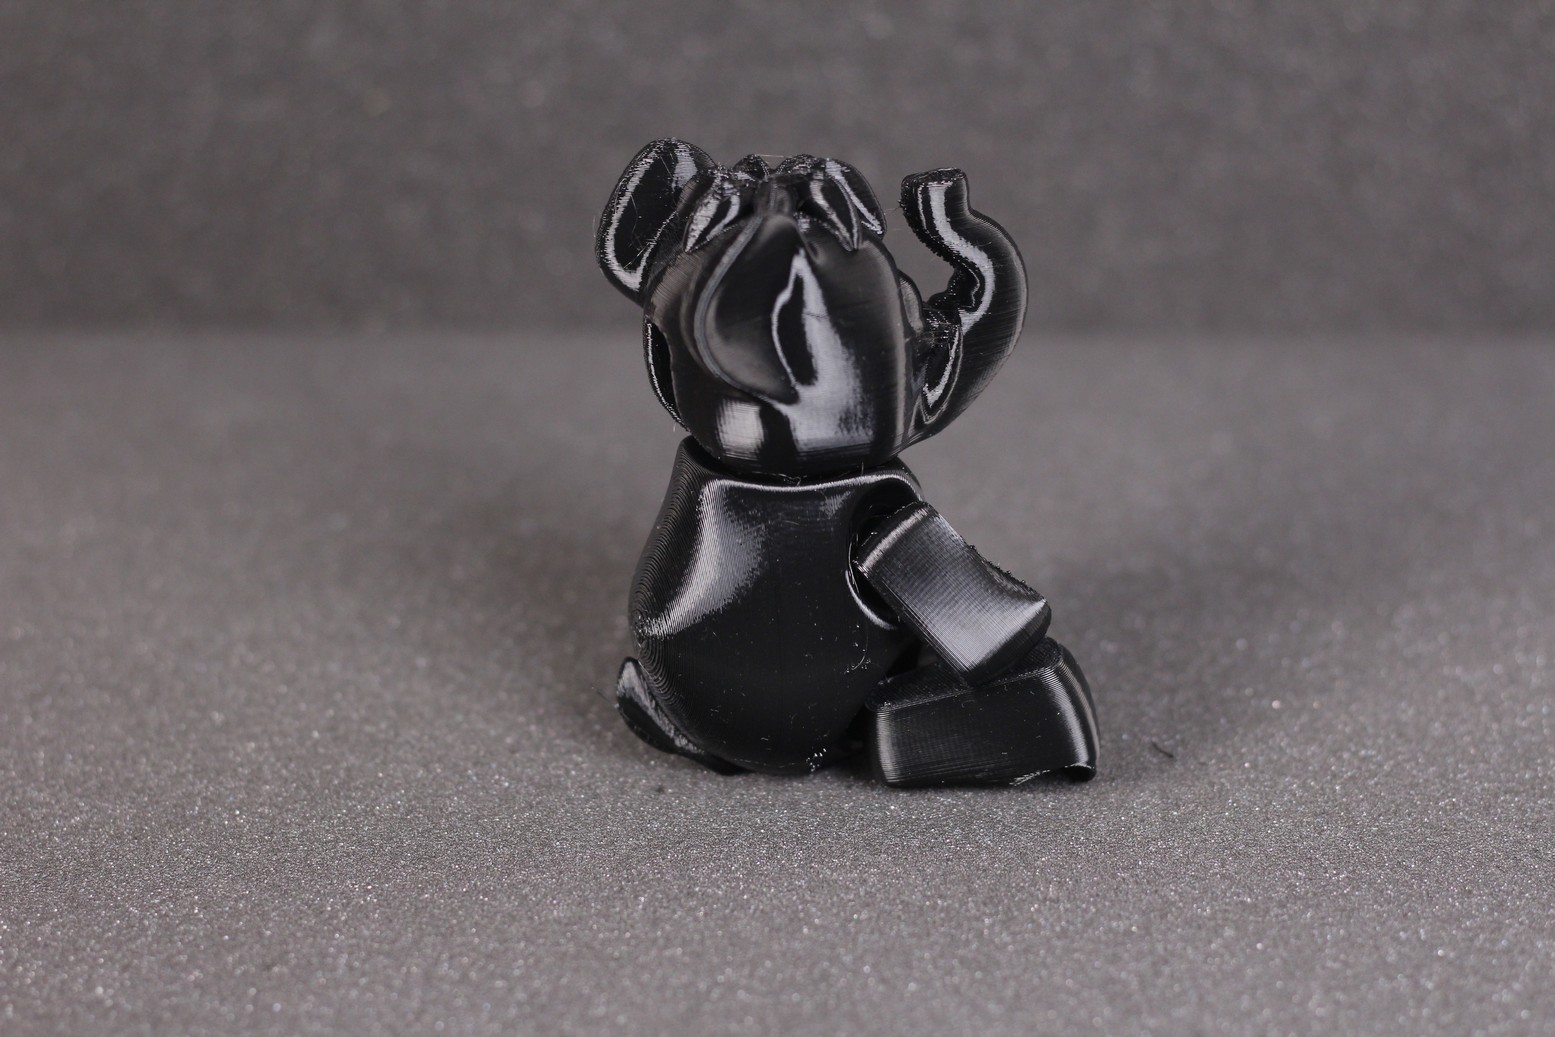 Flexi Mammoth PETG print on the Ender 2 Pro 1 | Creality Ender 2 Pro Review: Is it worth it?